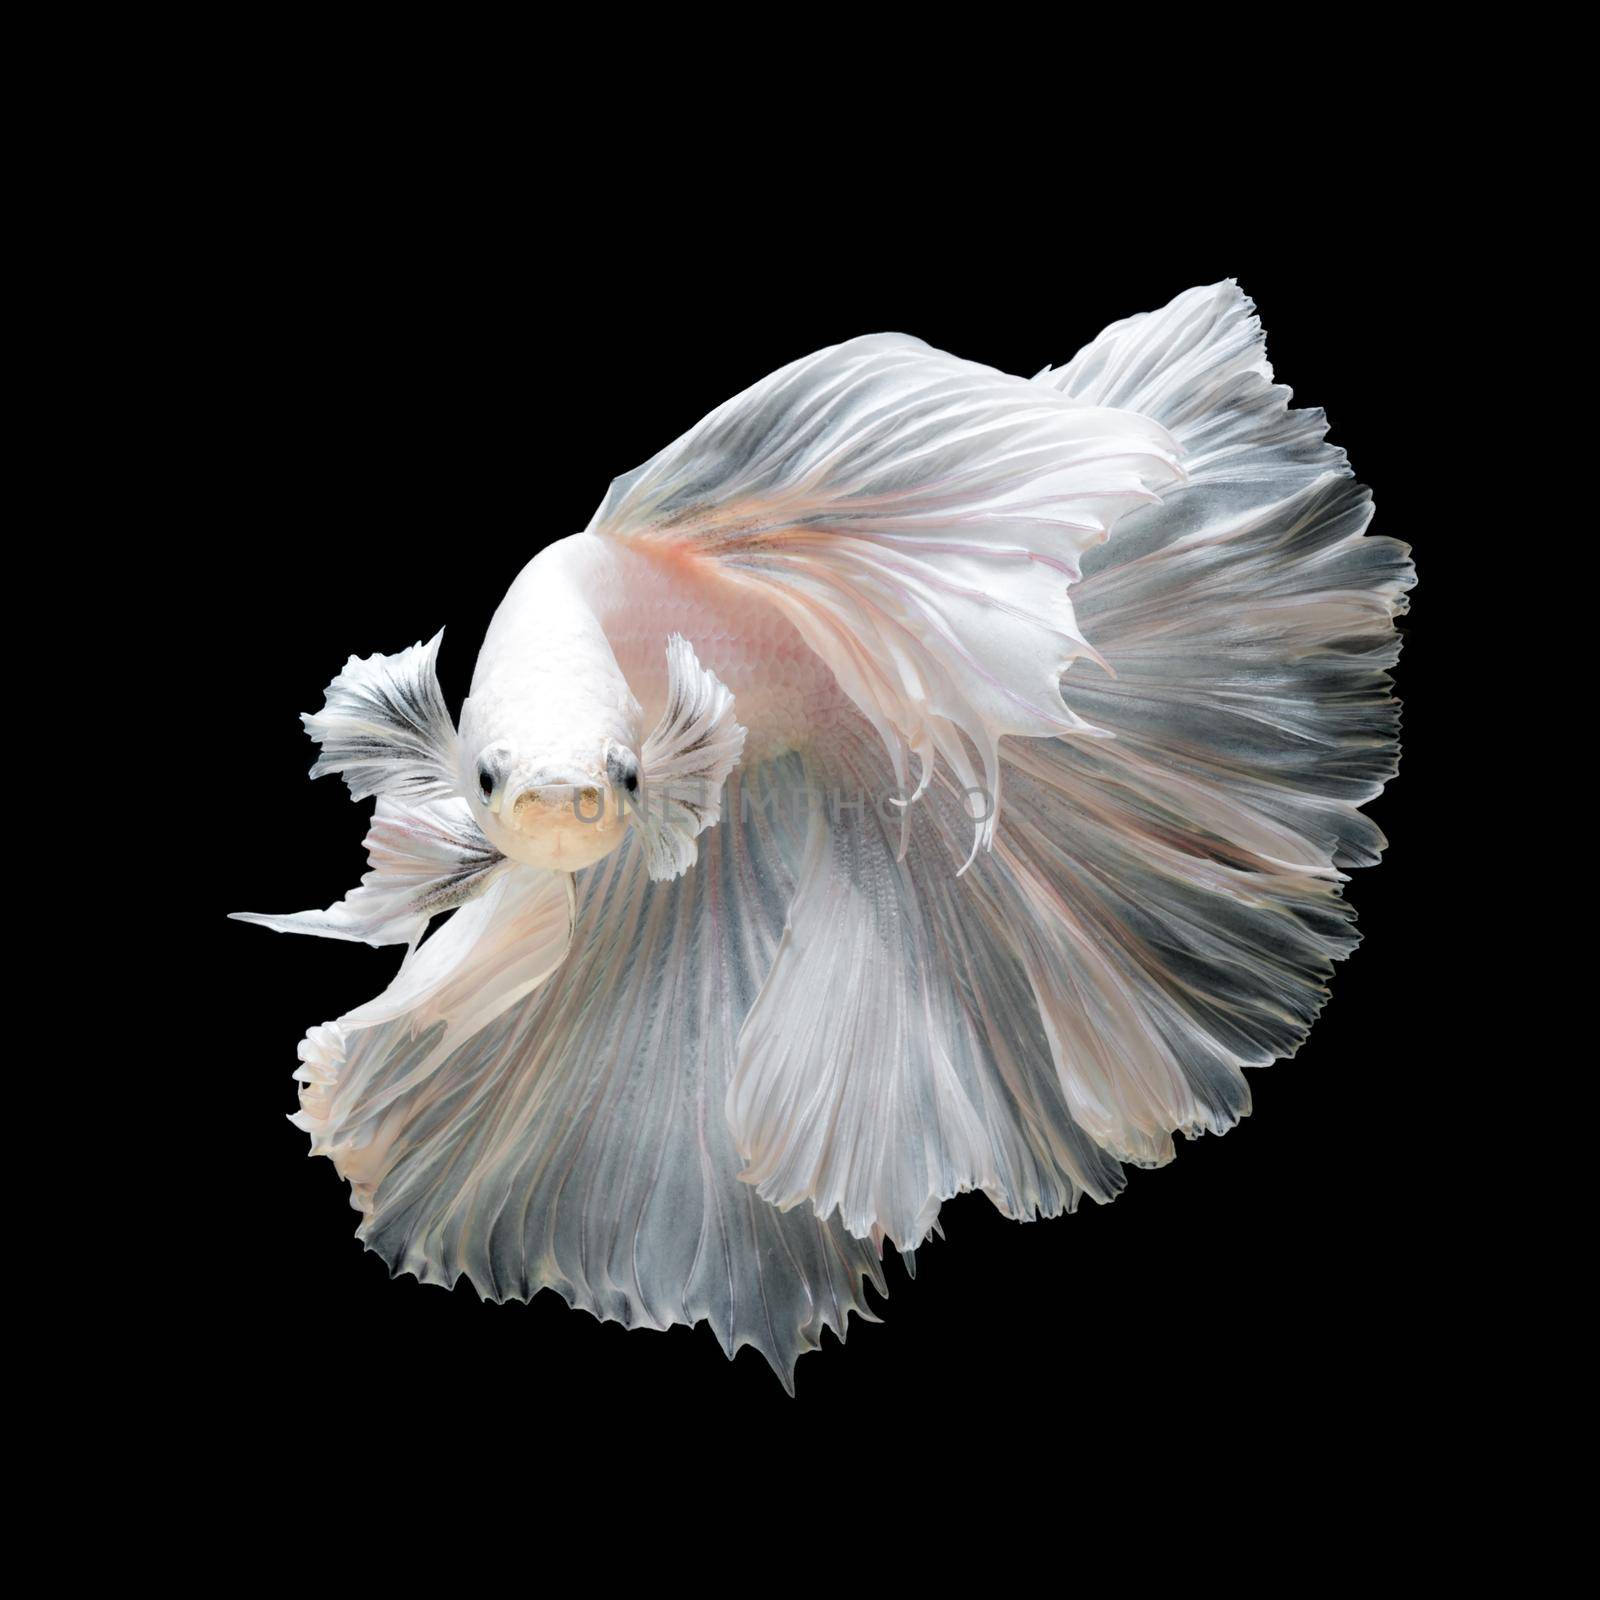 Close up of white platinum Betta fish or Siamese fighting fish in movement isolated on black background.